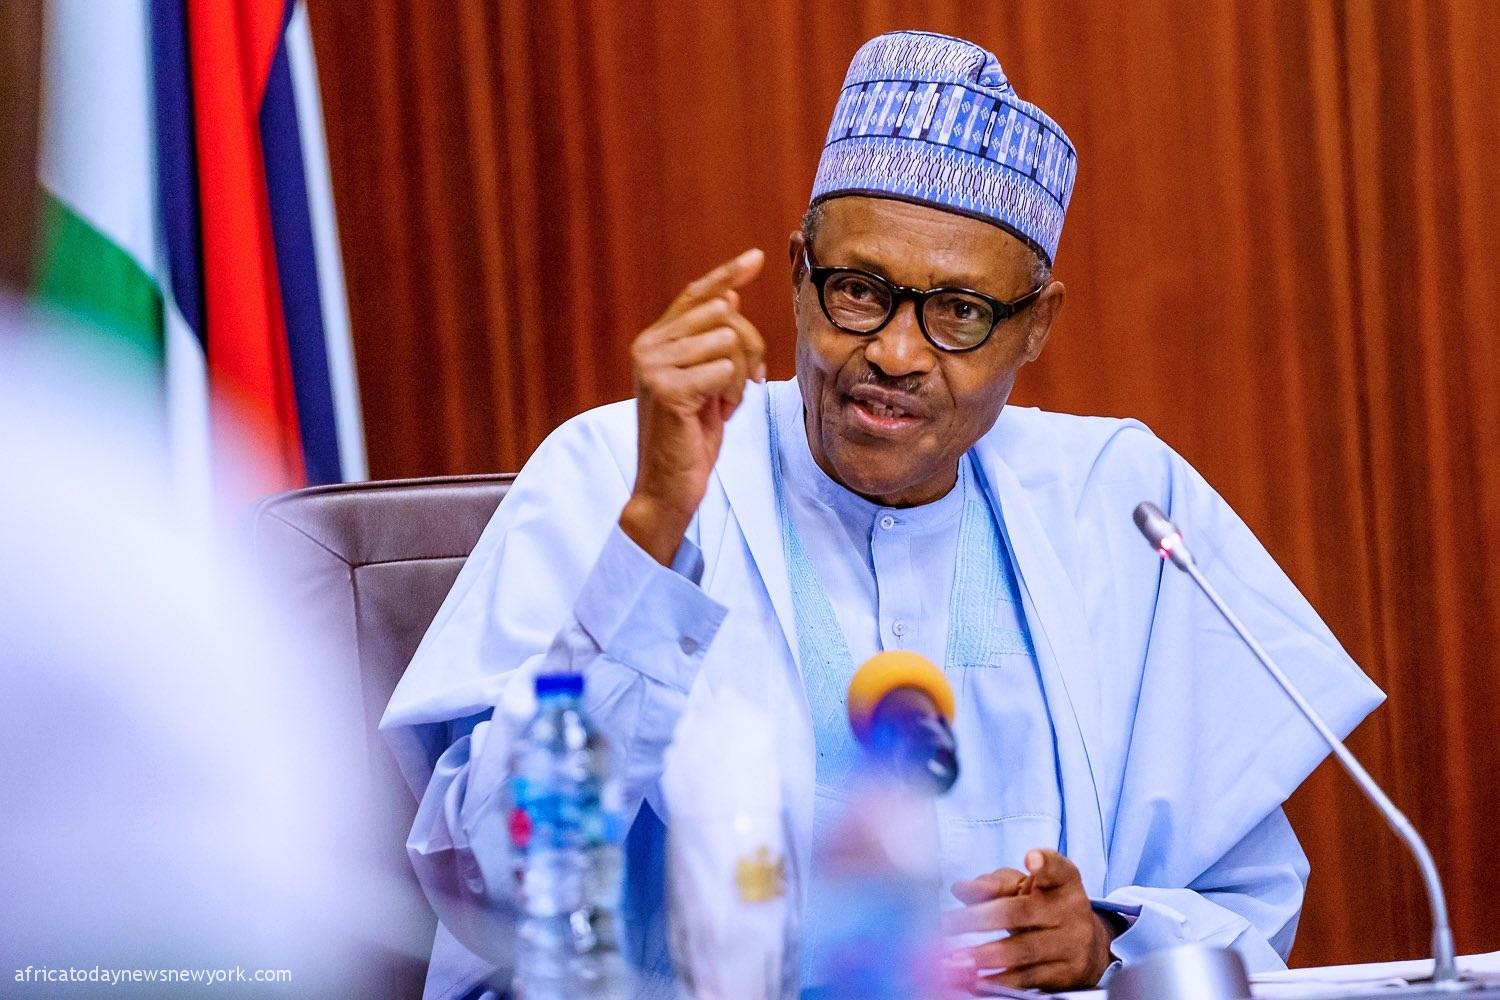 Why Military Can’t Carpet-Bomb Forests Now - Buhari's Govt